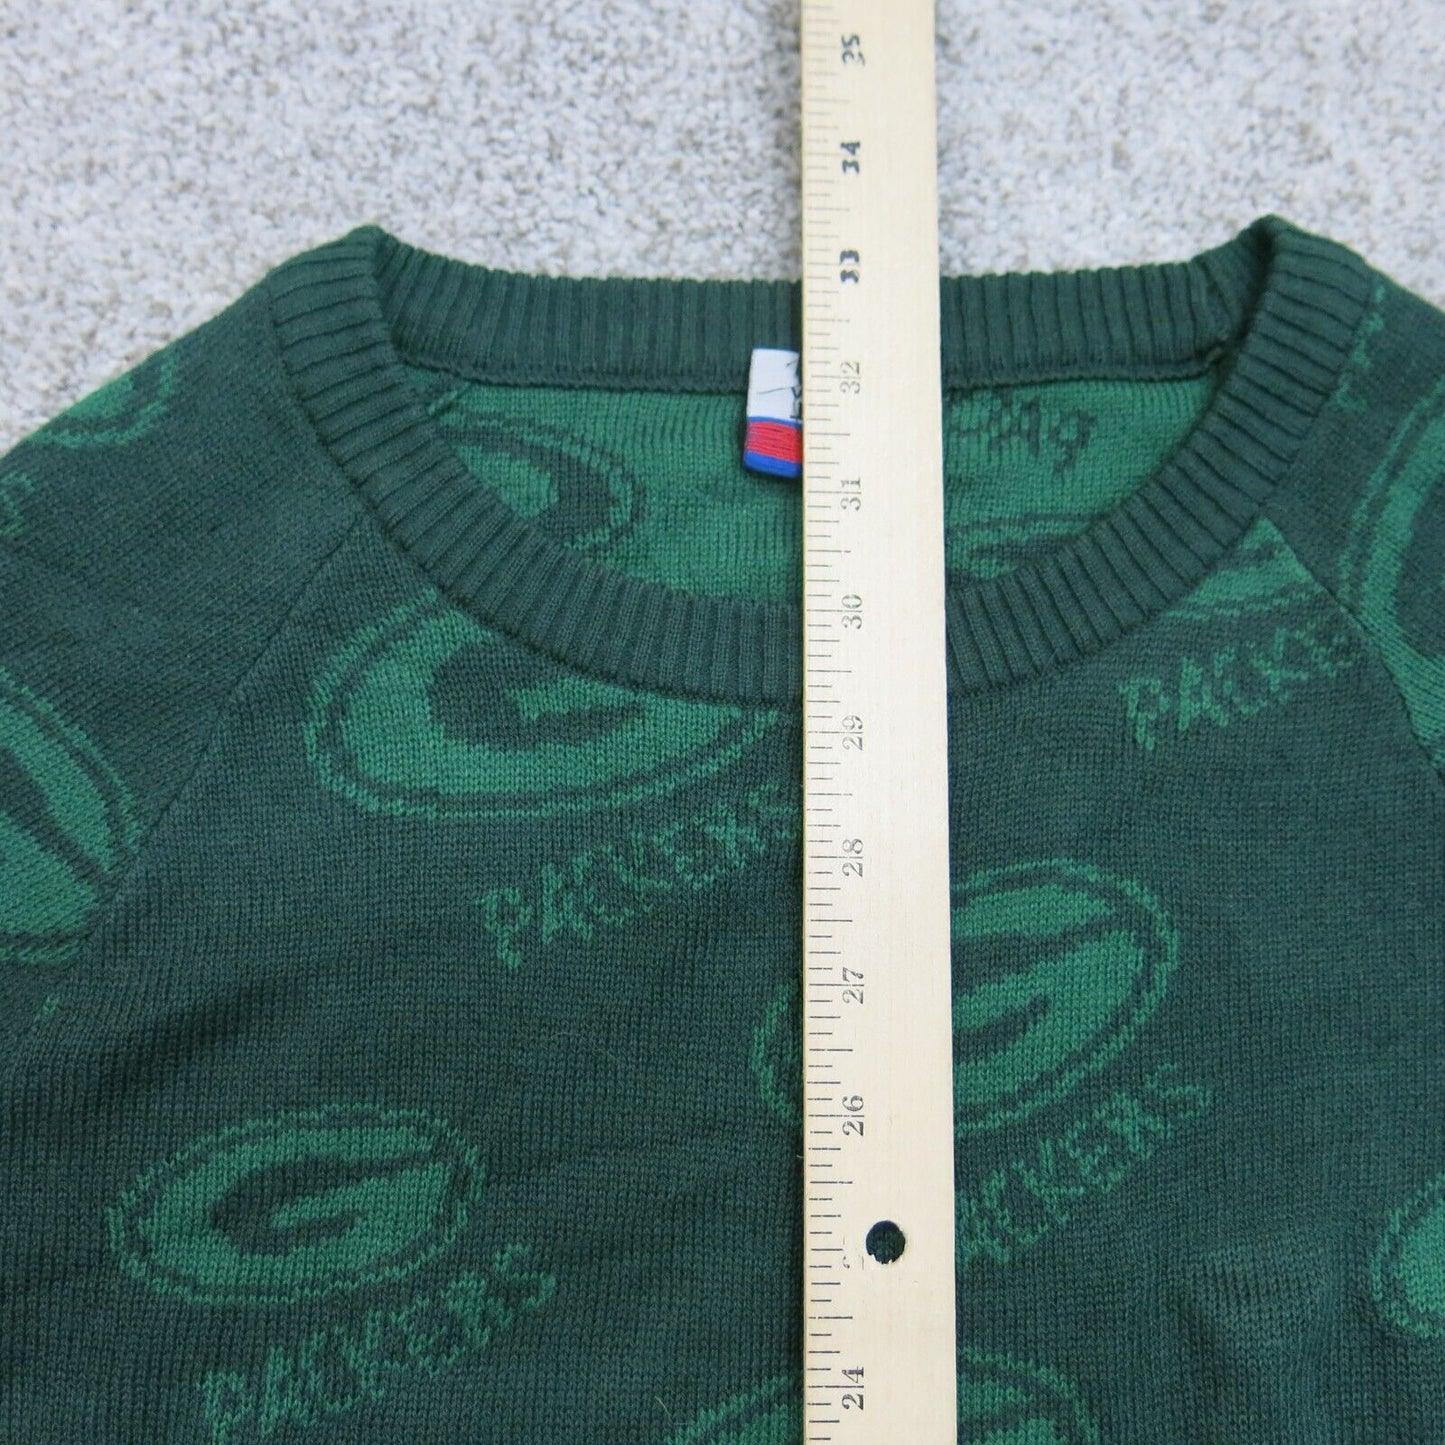 Green Packers Womens Knitted Sweater Dress Crew Neck Long Sleeves Green Size S